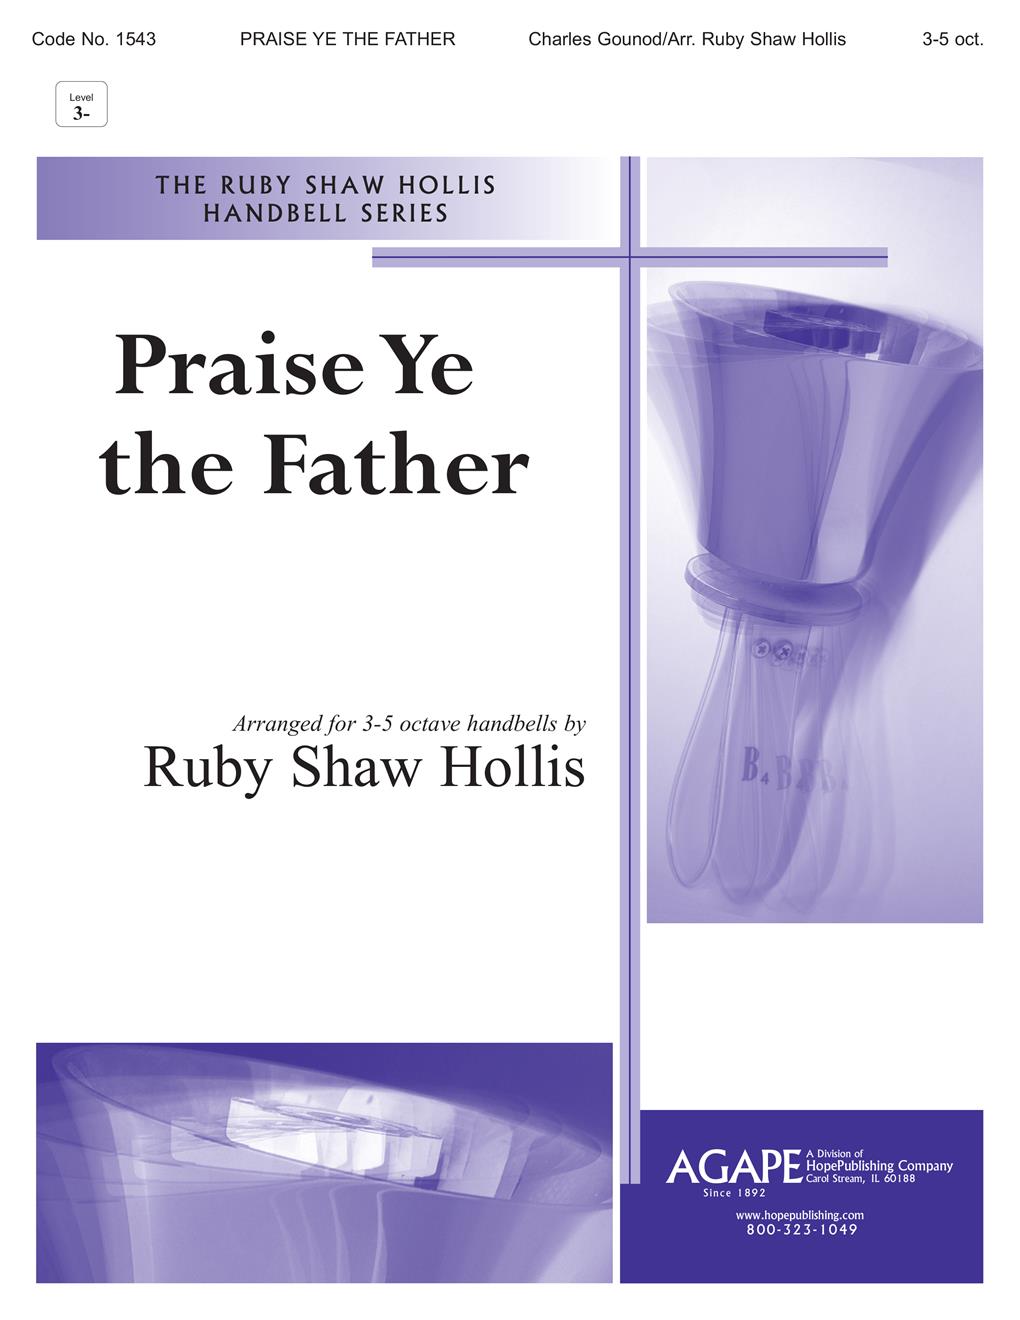 Praise Ye the Father - 3-5 Oct. Cover Image